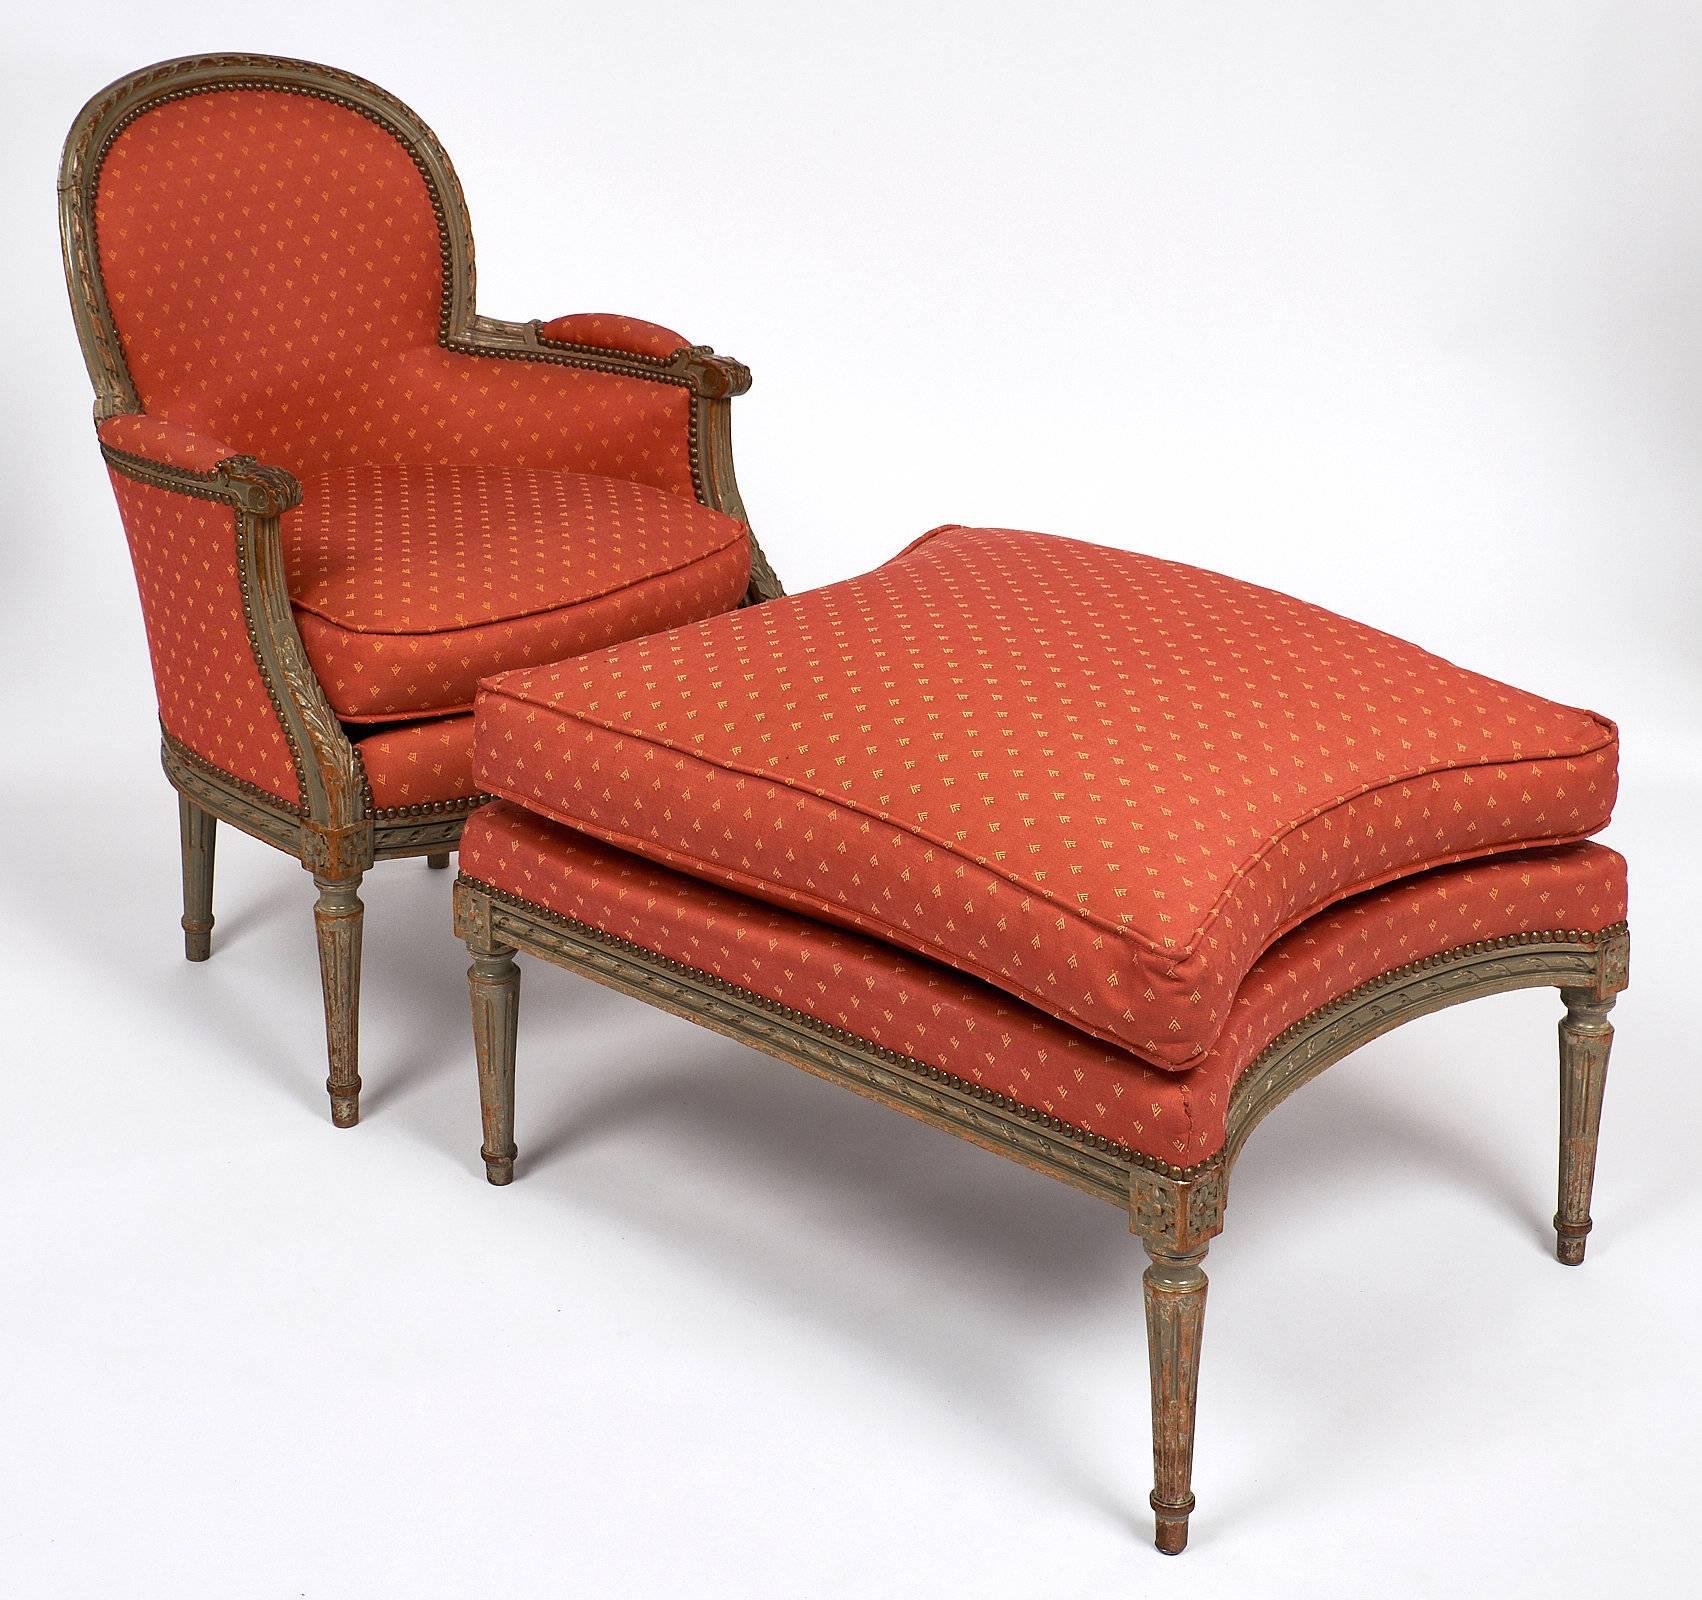 Elegant bergère with a large ottoman for a relaxing seat. This beautiful piece has the original salmon colored upholstery throughout. The frame has detailed hand-carved leaf work and fluted, tapered legs. The curved arms and rounded back add